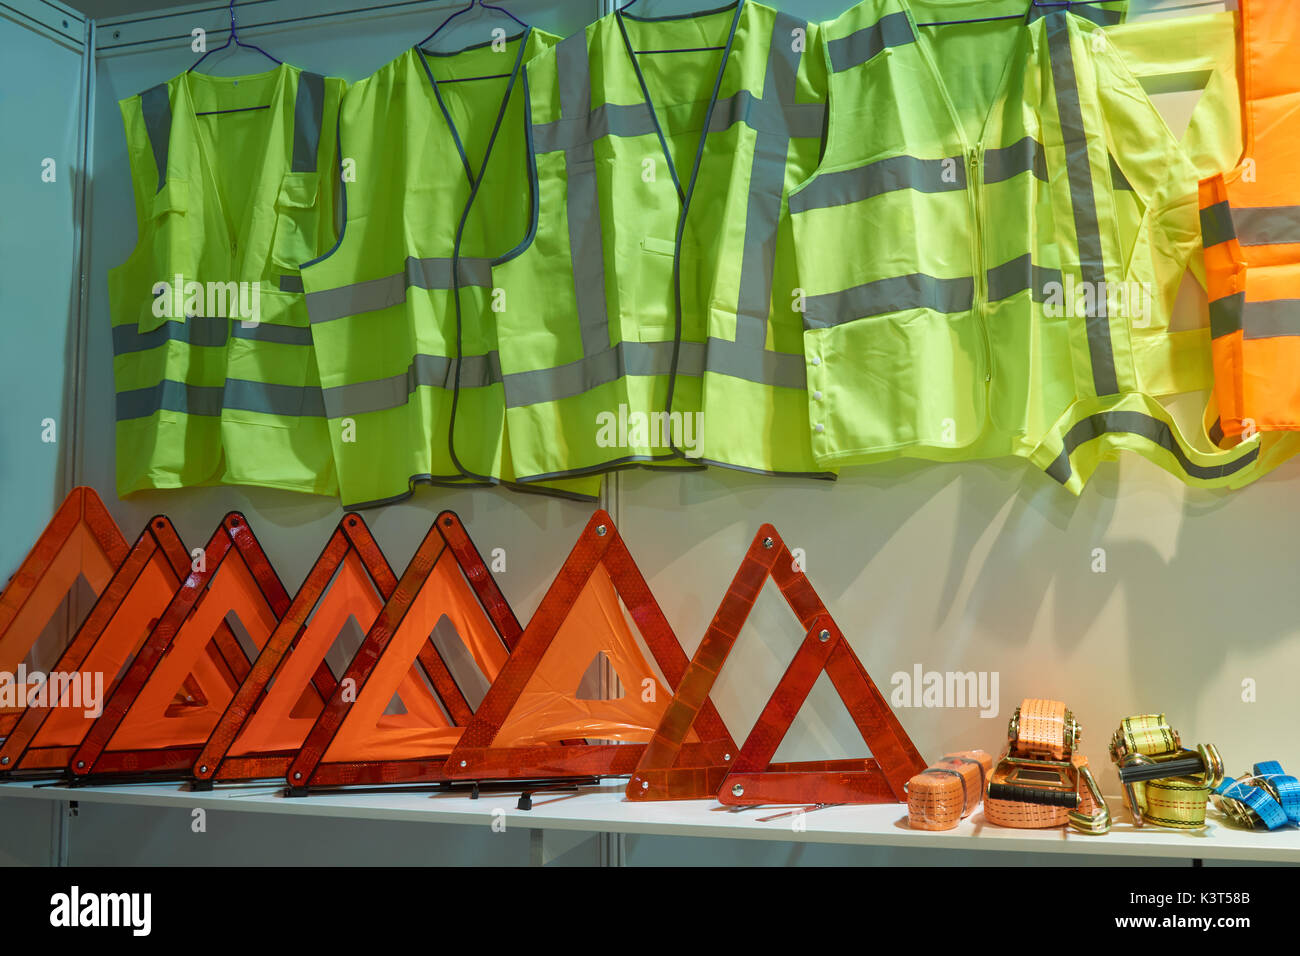 Emergency reflective triangle signs, yellow reflective vests for drivers and tow ropes Stock Photo